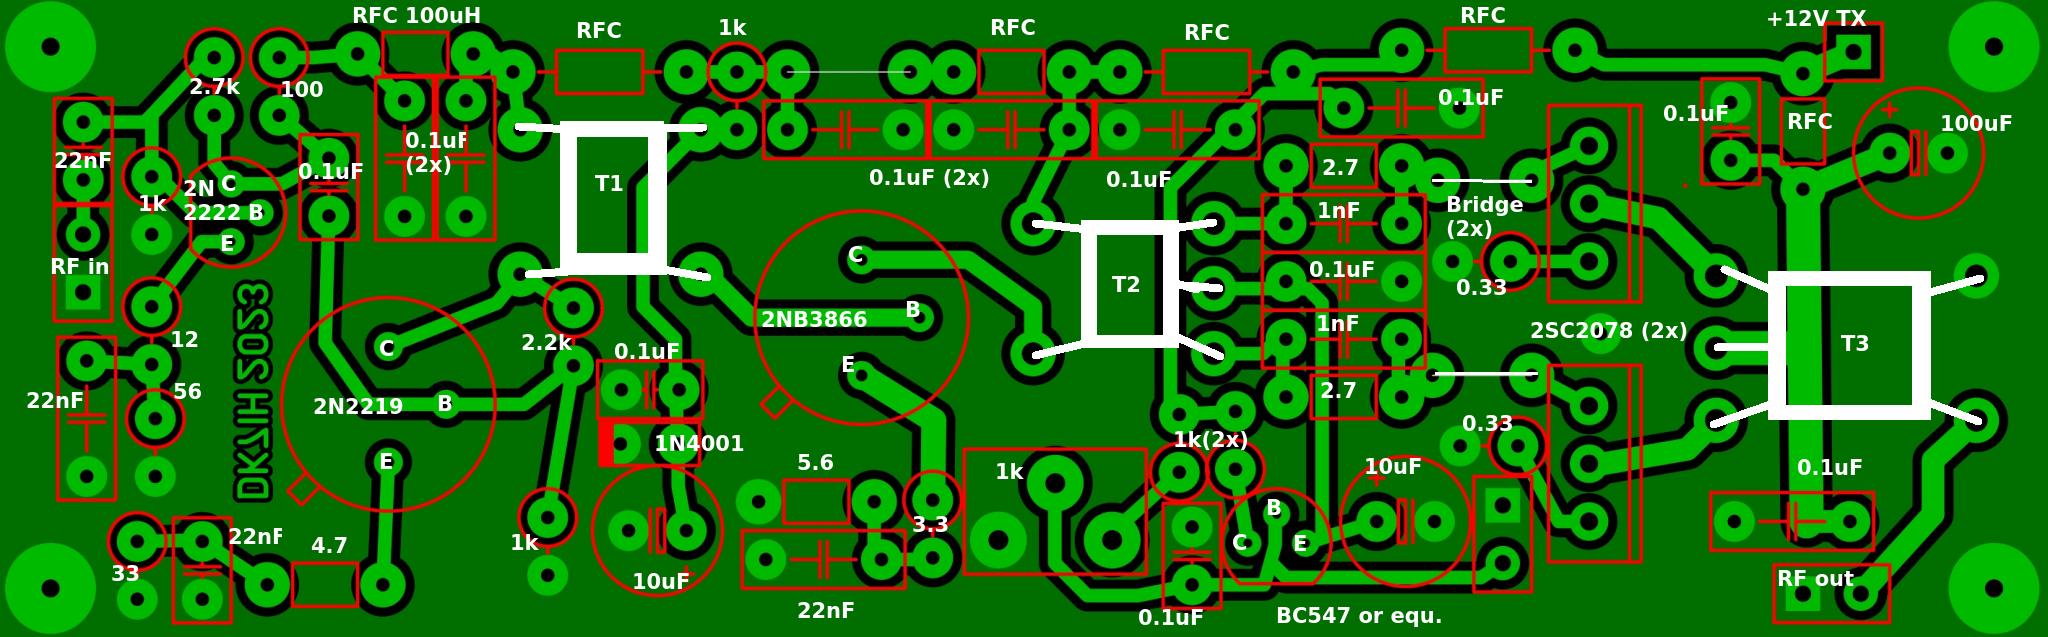 DK7IH QRP PA - board layout and component values